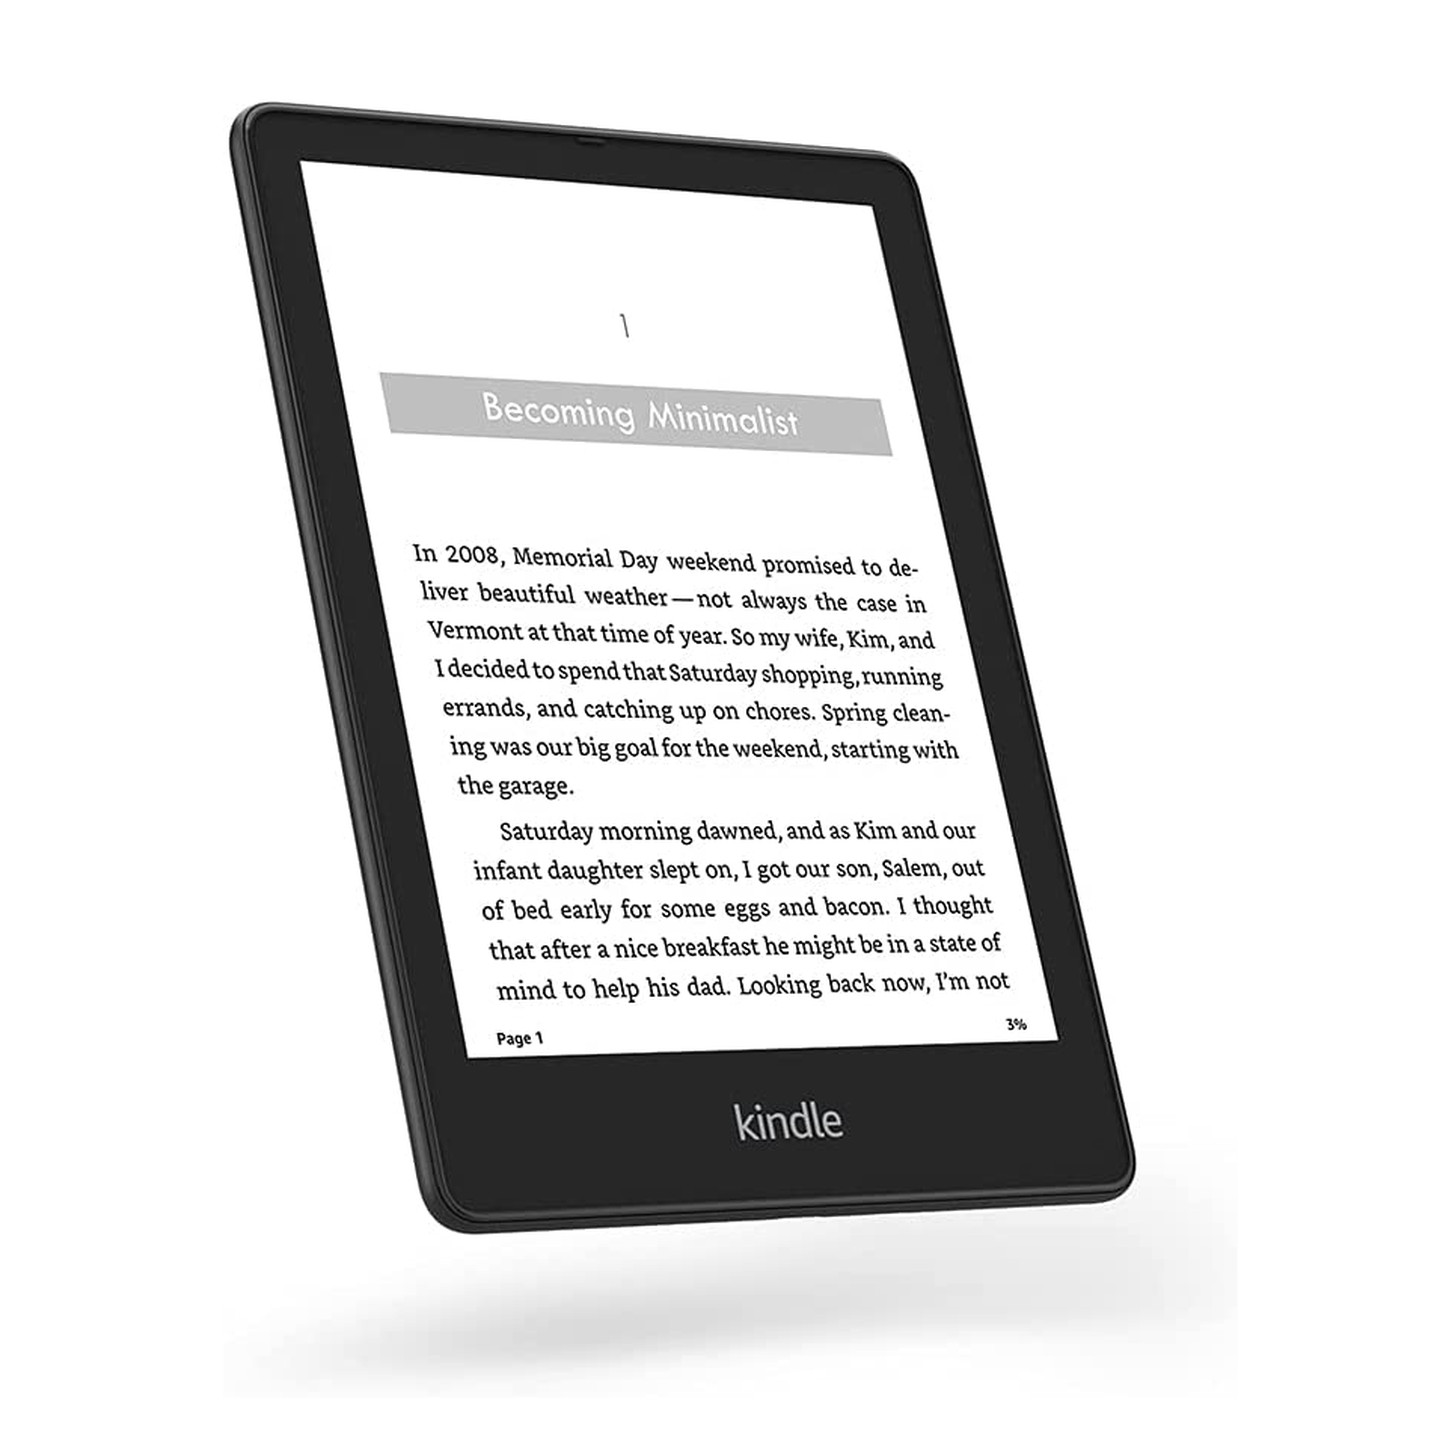 Amazon’s latest Kindle Paperwhite hits a new low price for Prime Day